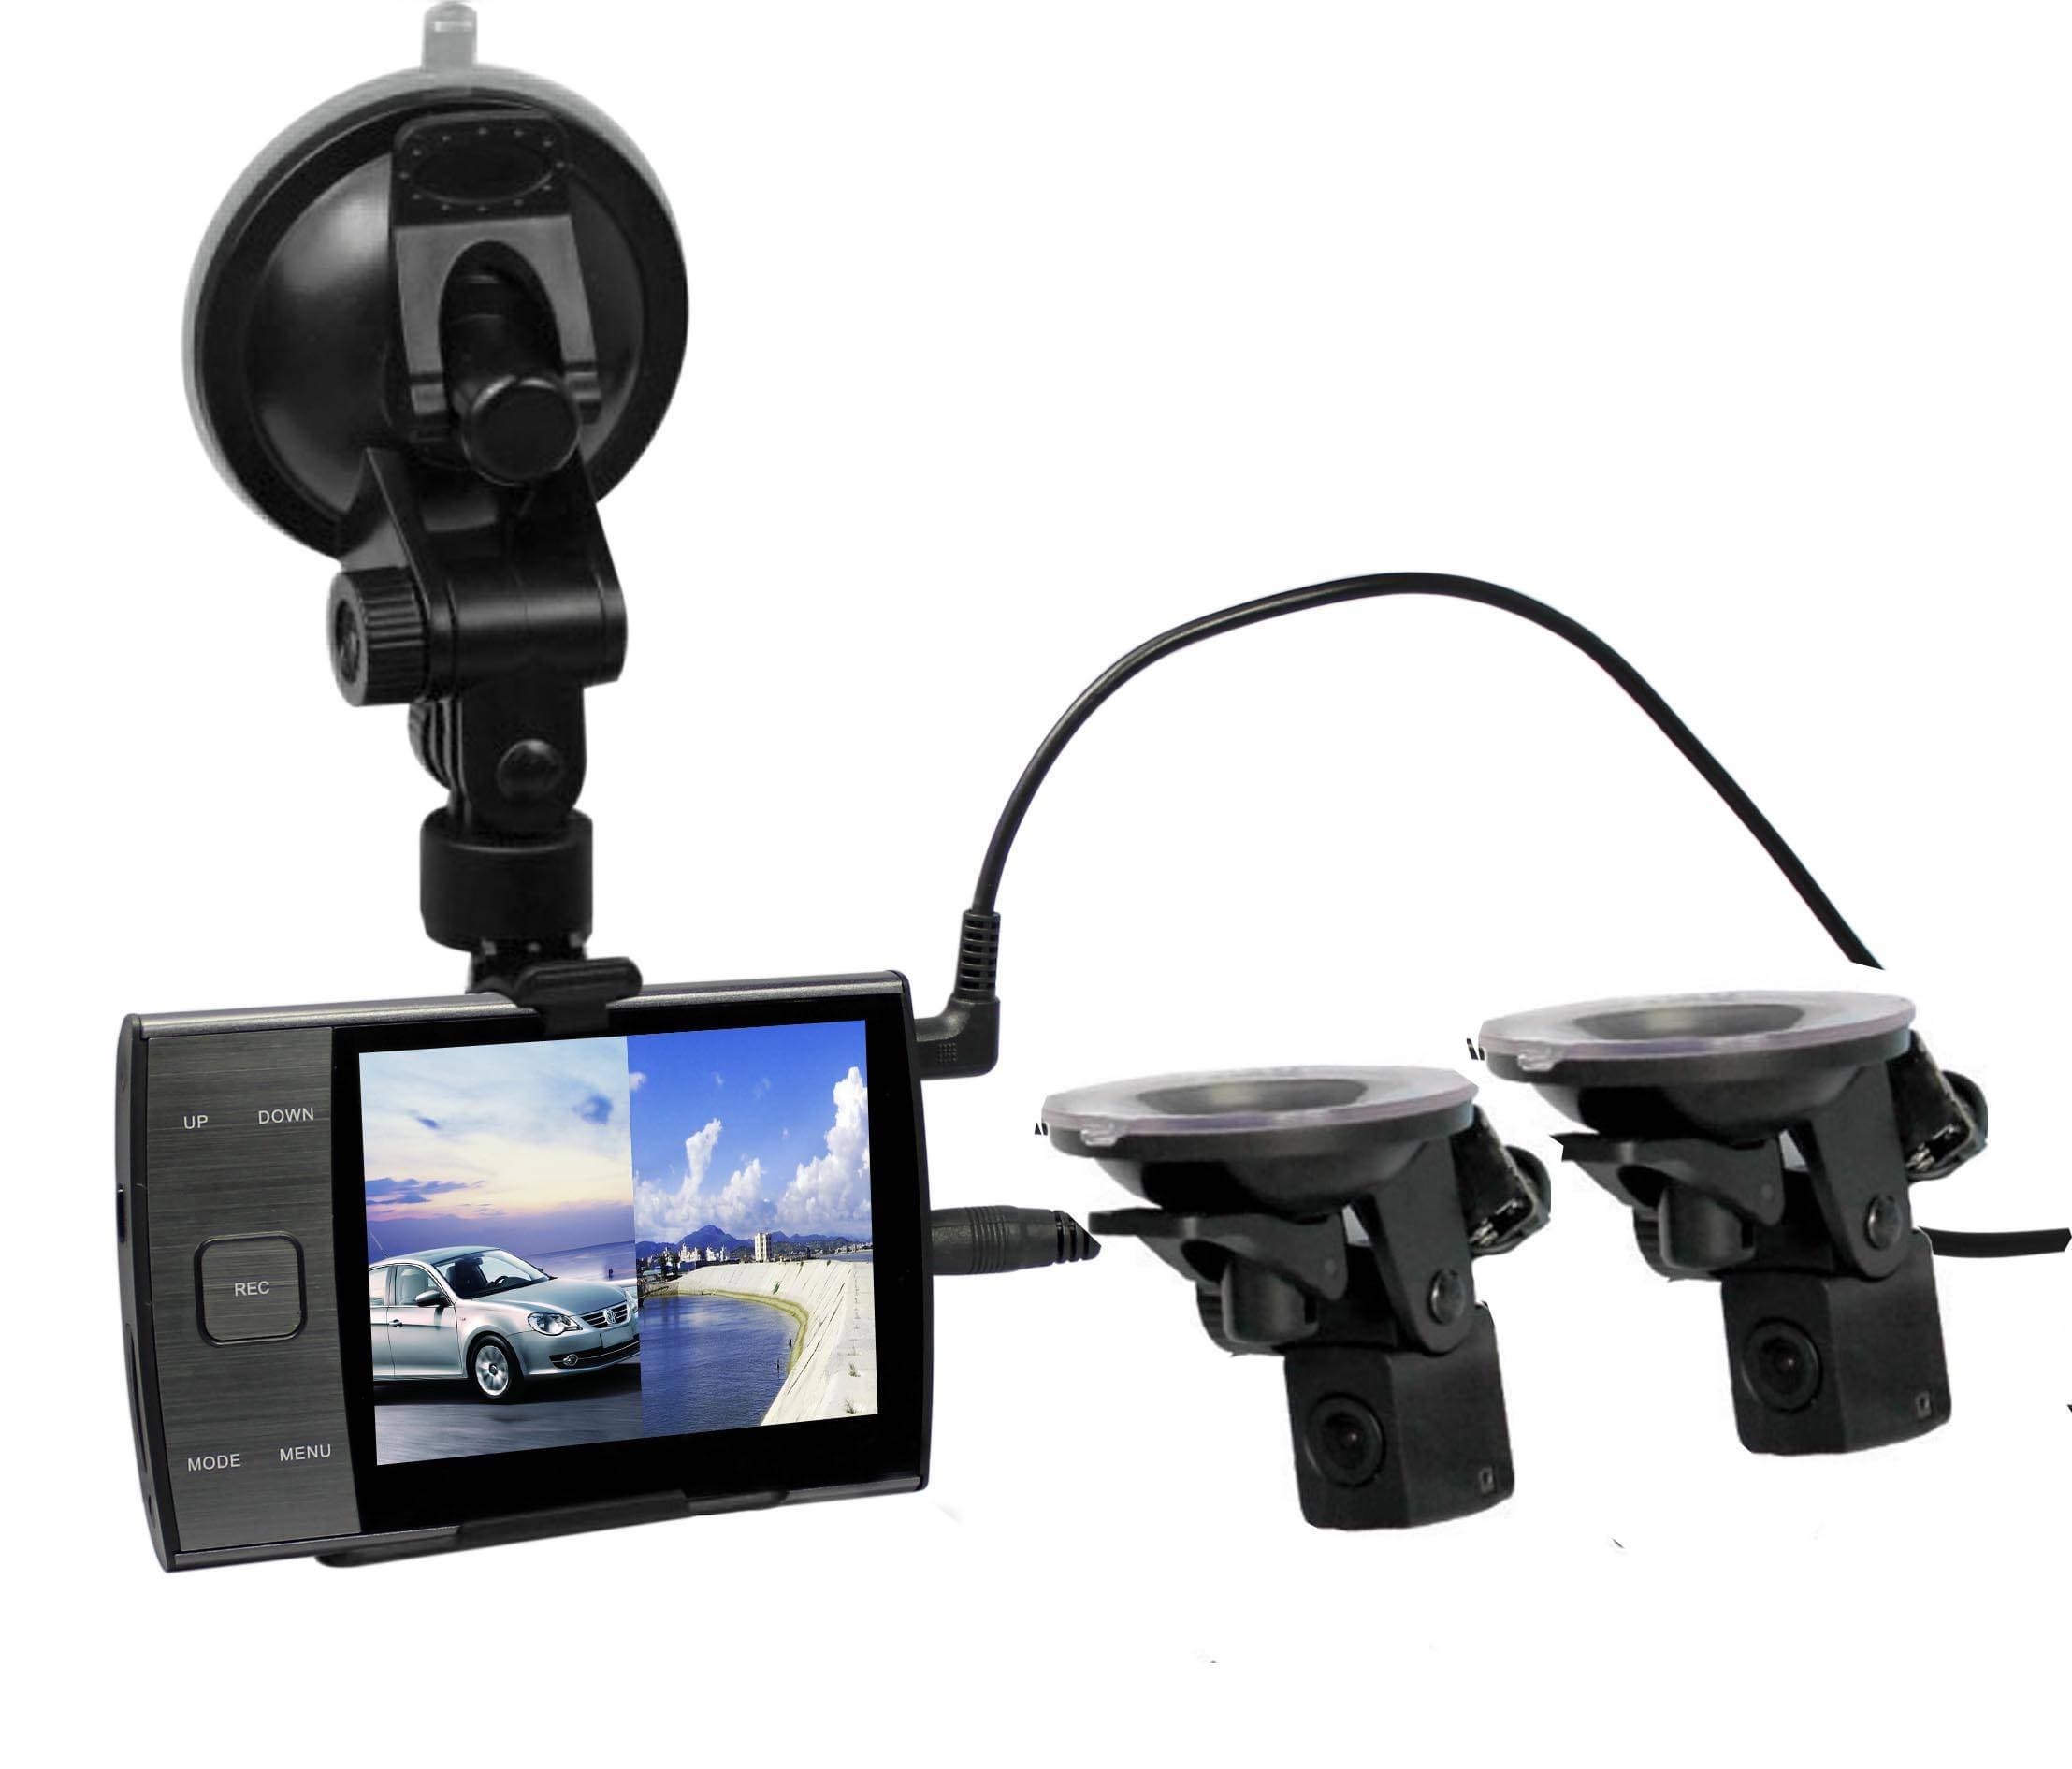 BW 3.5 Inch TFT-LCD Car Rearview Mirror Monitor with Pocket-sized Color LCD Display,Mini Monitor for Car/Automobile 